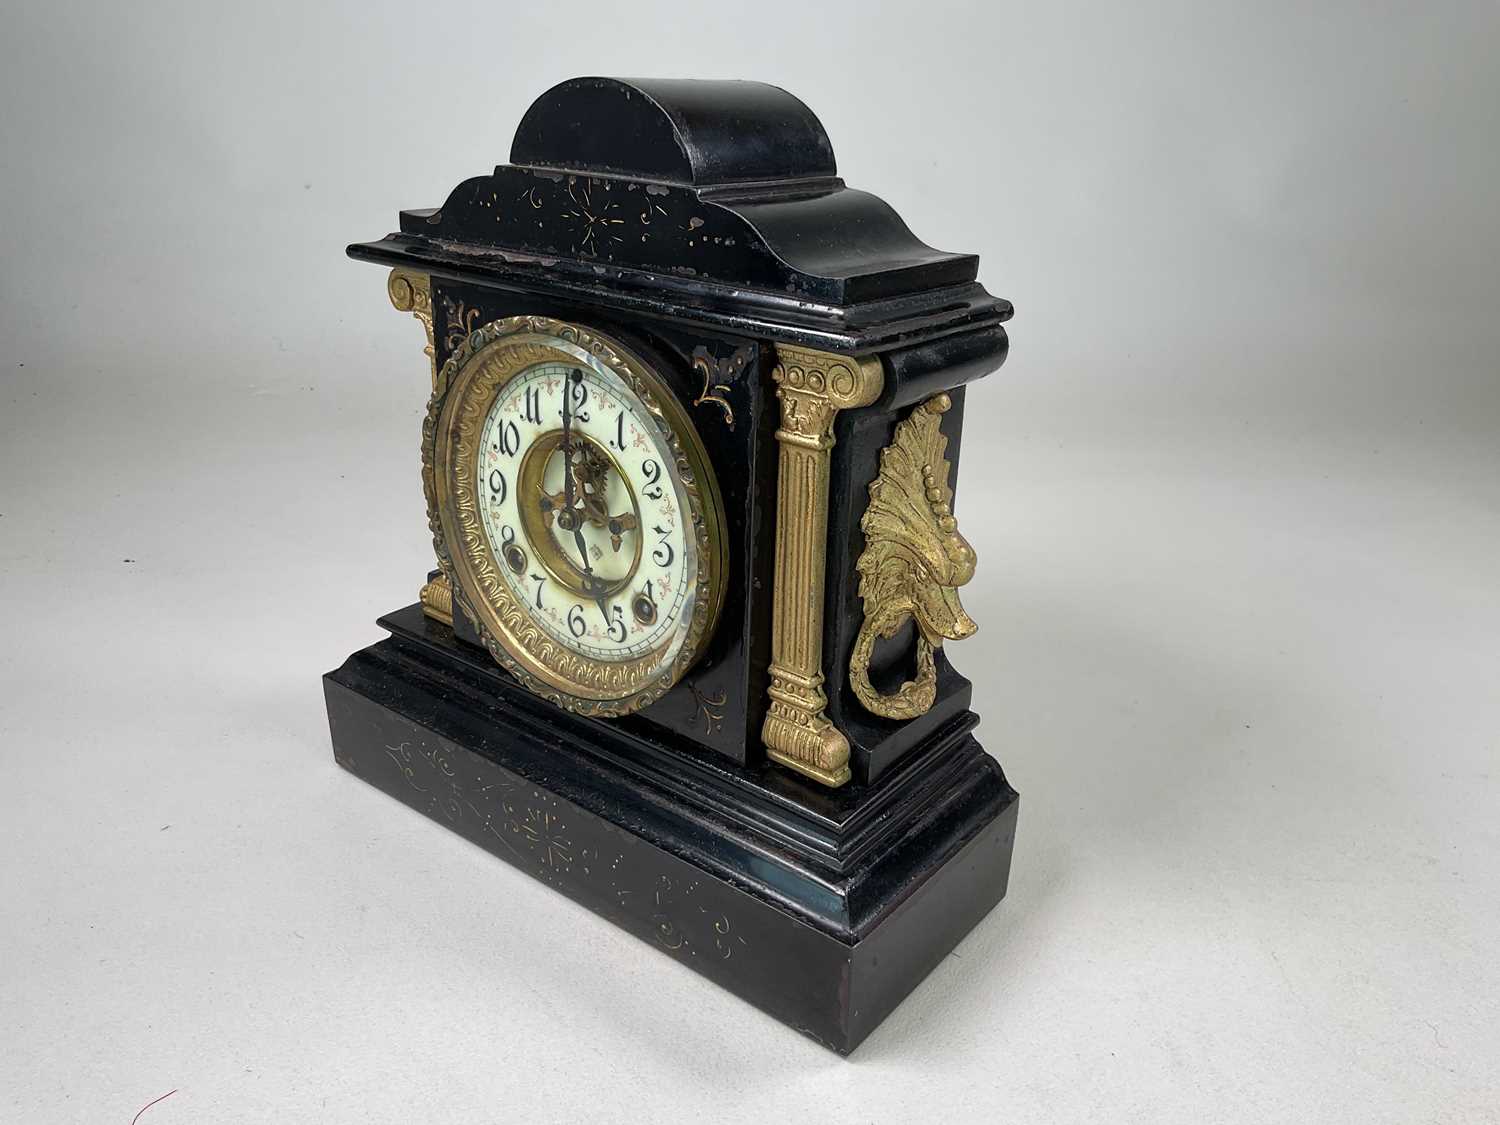 ANSONIA CLOCK CO; a mantel clock in black enamelled iron case with gilded decoration, height 31cm, - Image 4 of 4